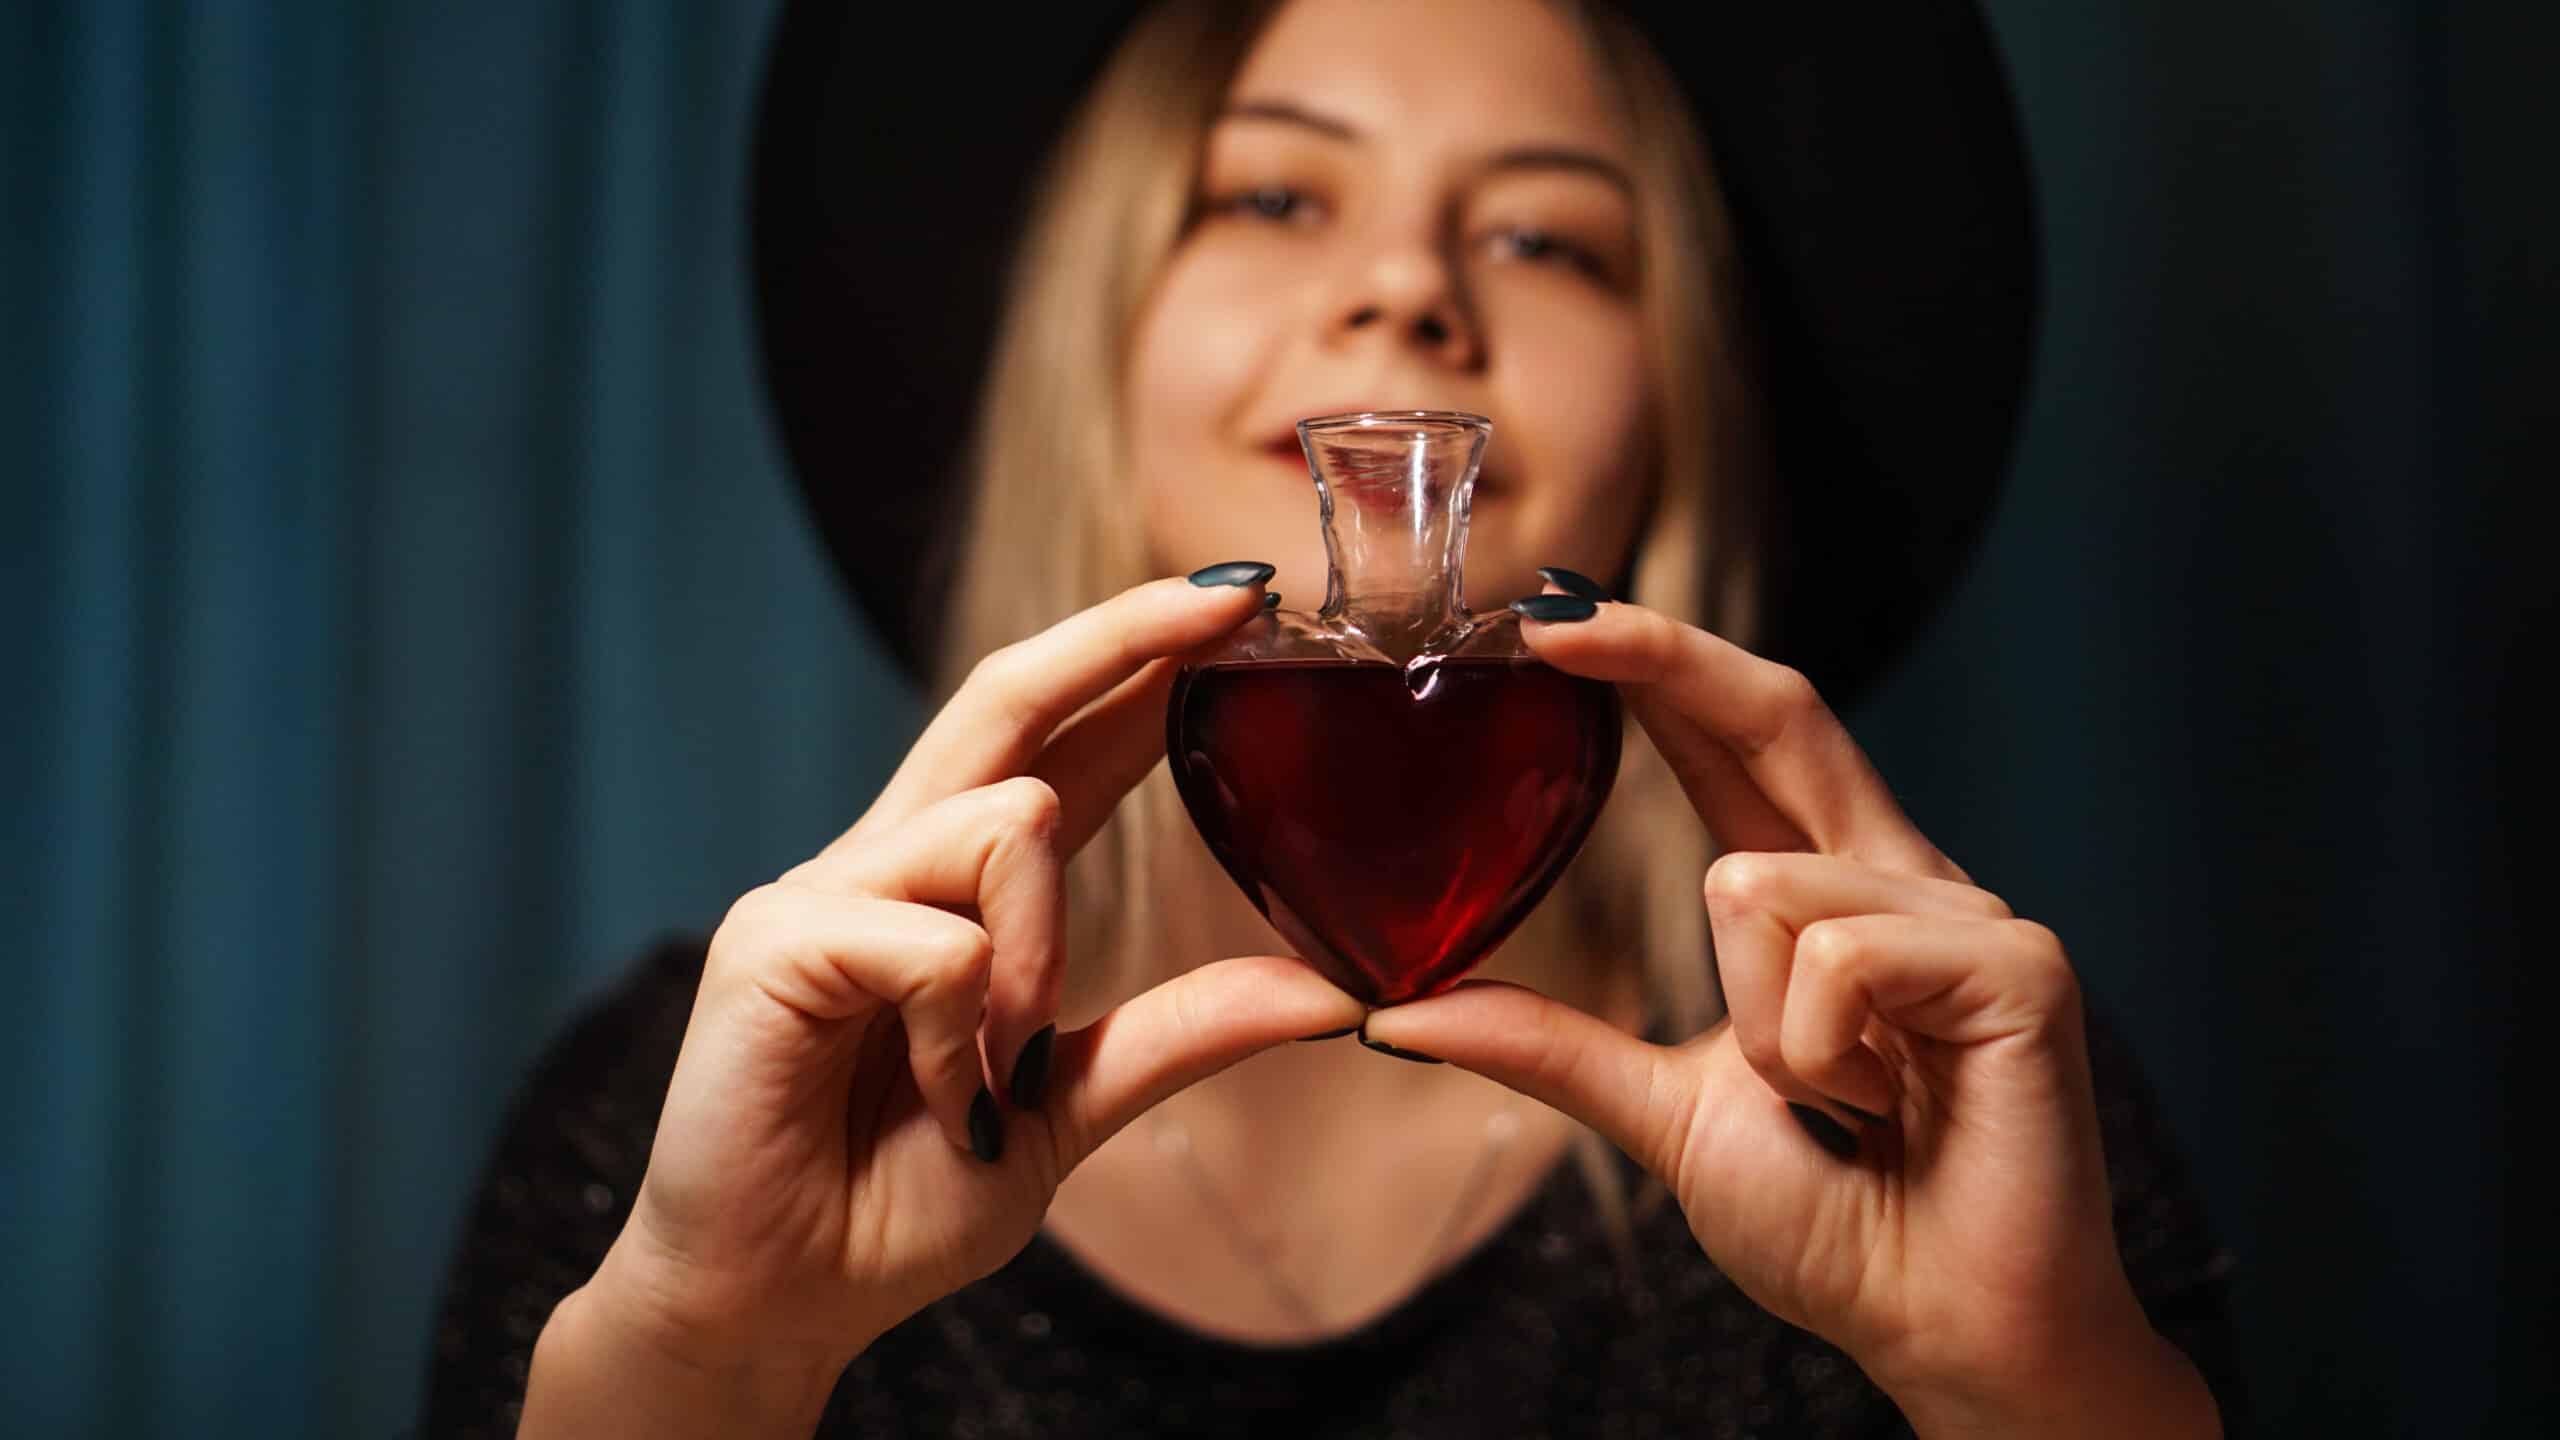 cropped image of woman holding heart shaped glass 2023 03 13 18 52 53 utc scaled